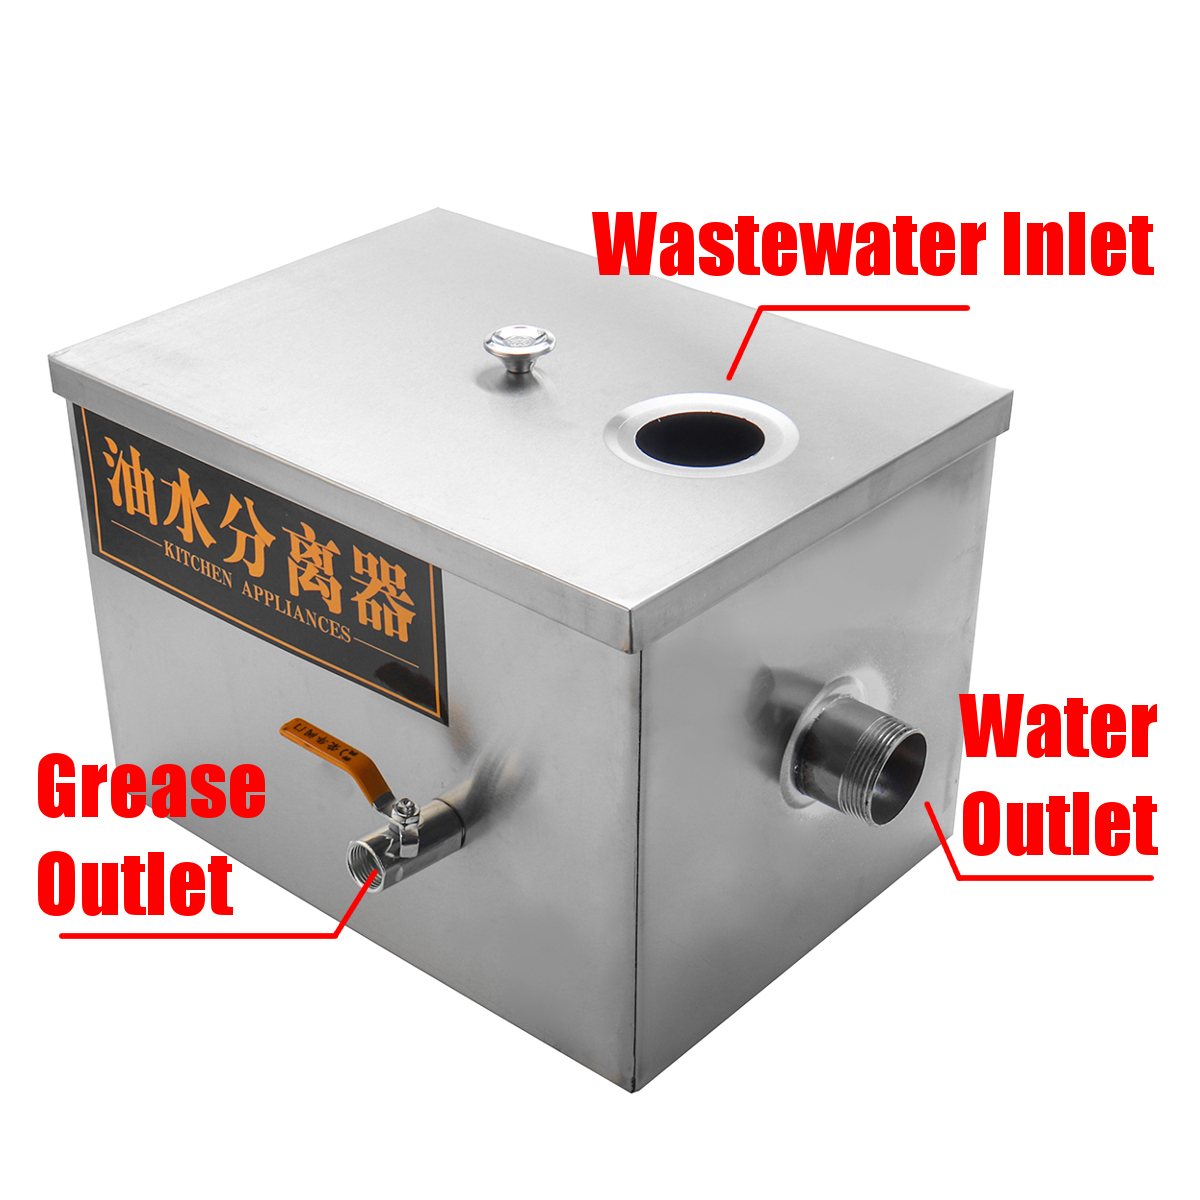 Commercial-Grease-Trap-Interceptor-Stainless-Steel-Interceptor-Grease-Trap-Tools-1278796